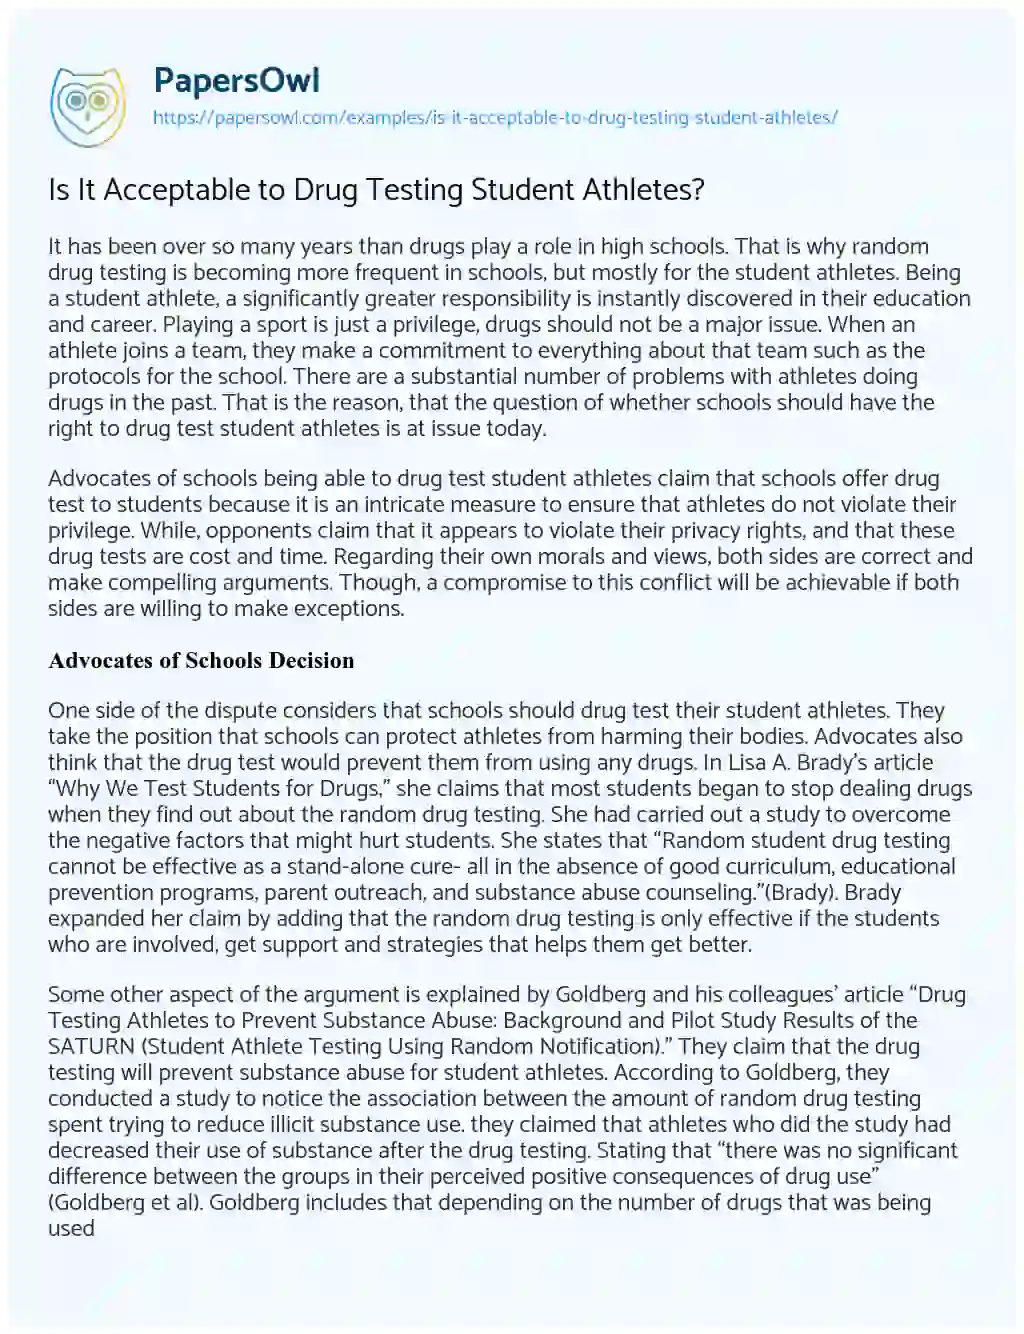 Is it Acceptable to Drug Testing Student Athletes? essay